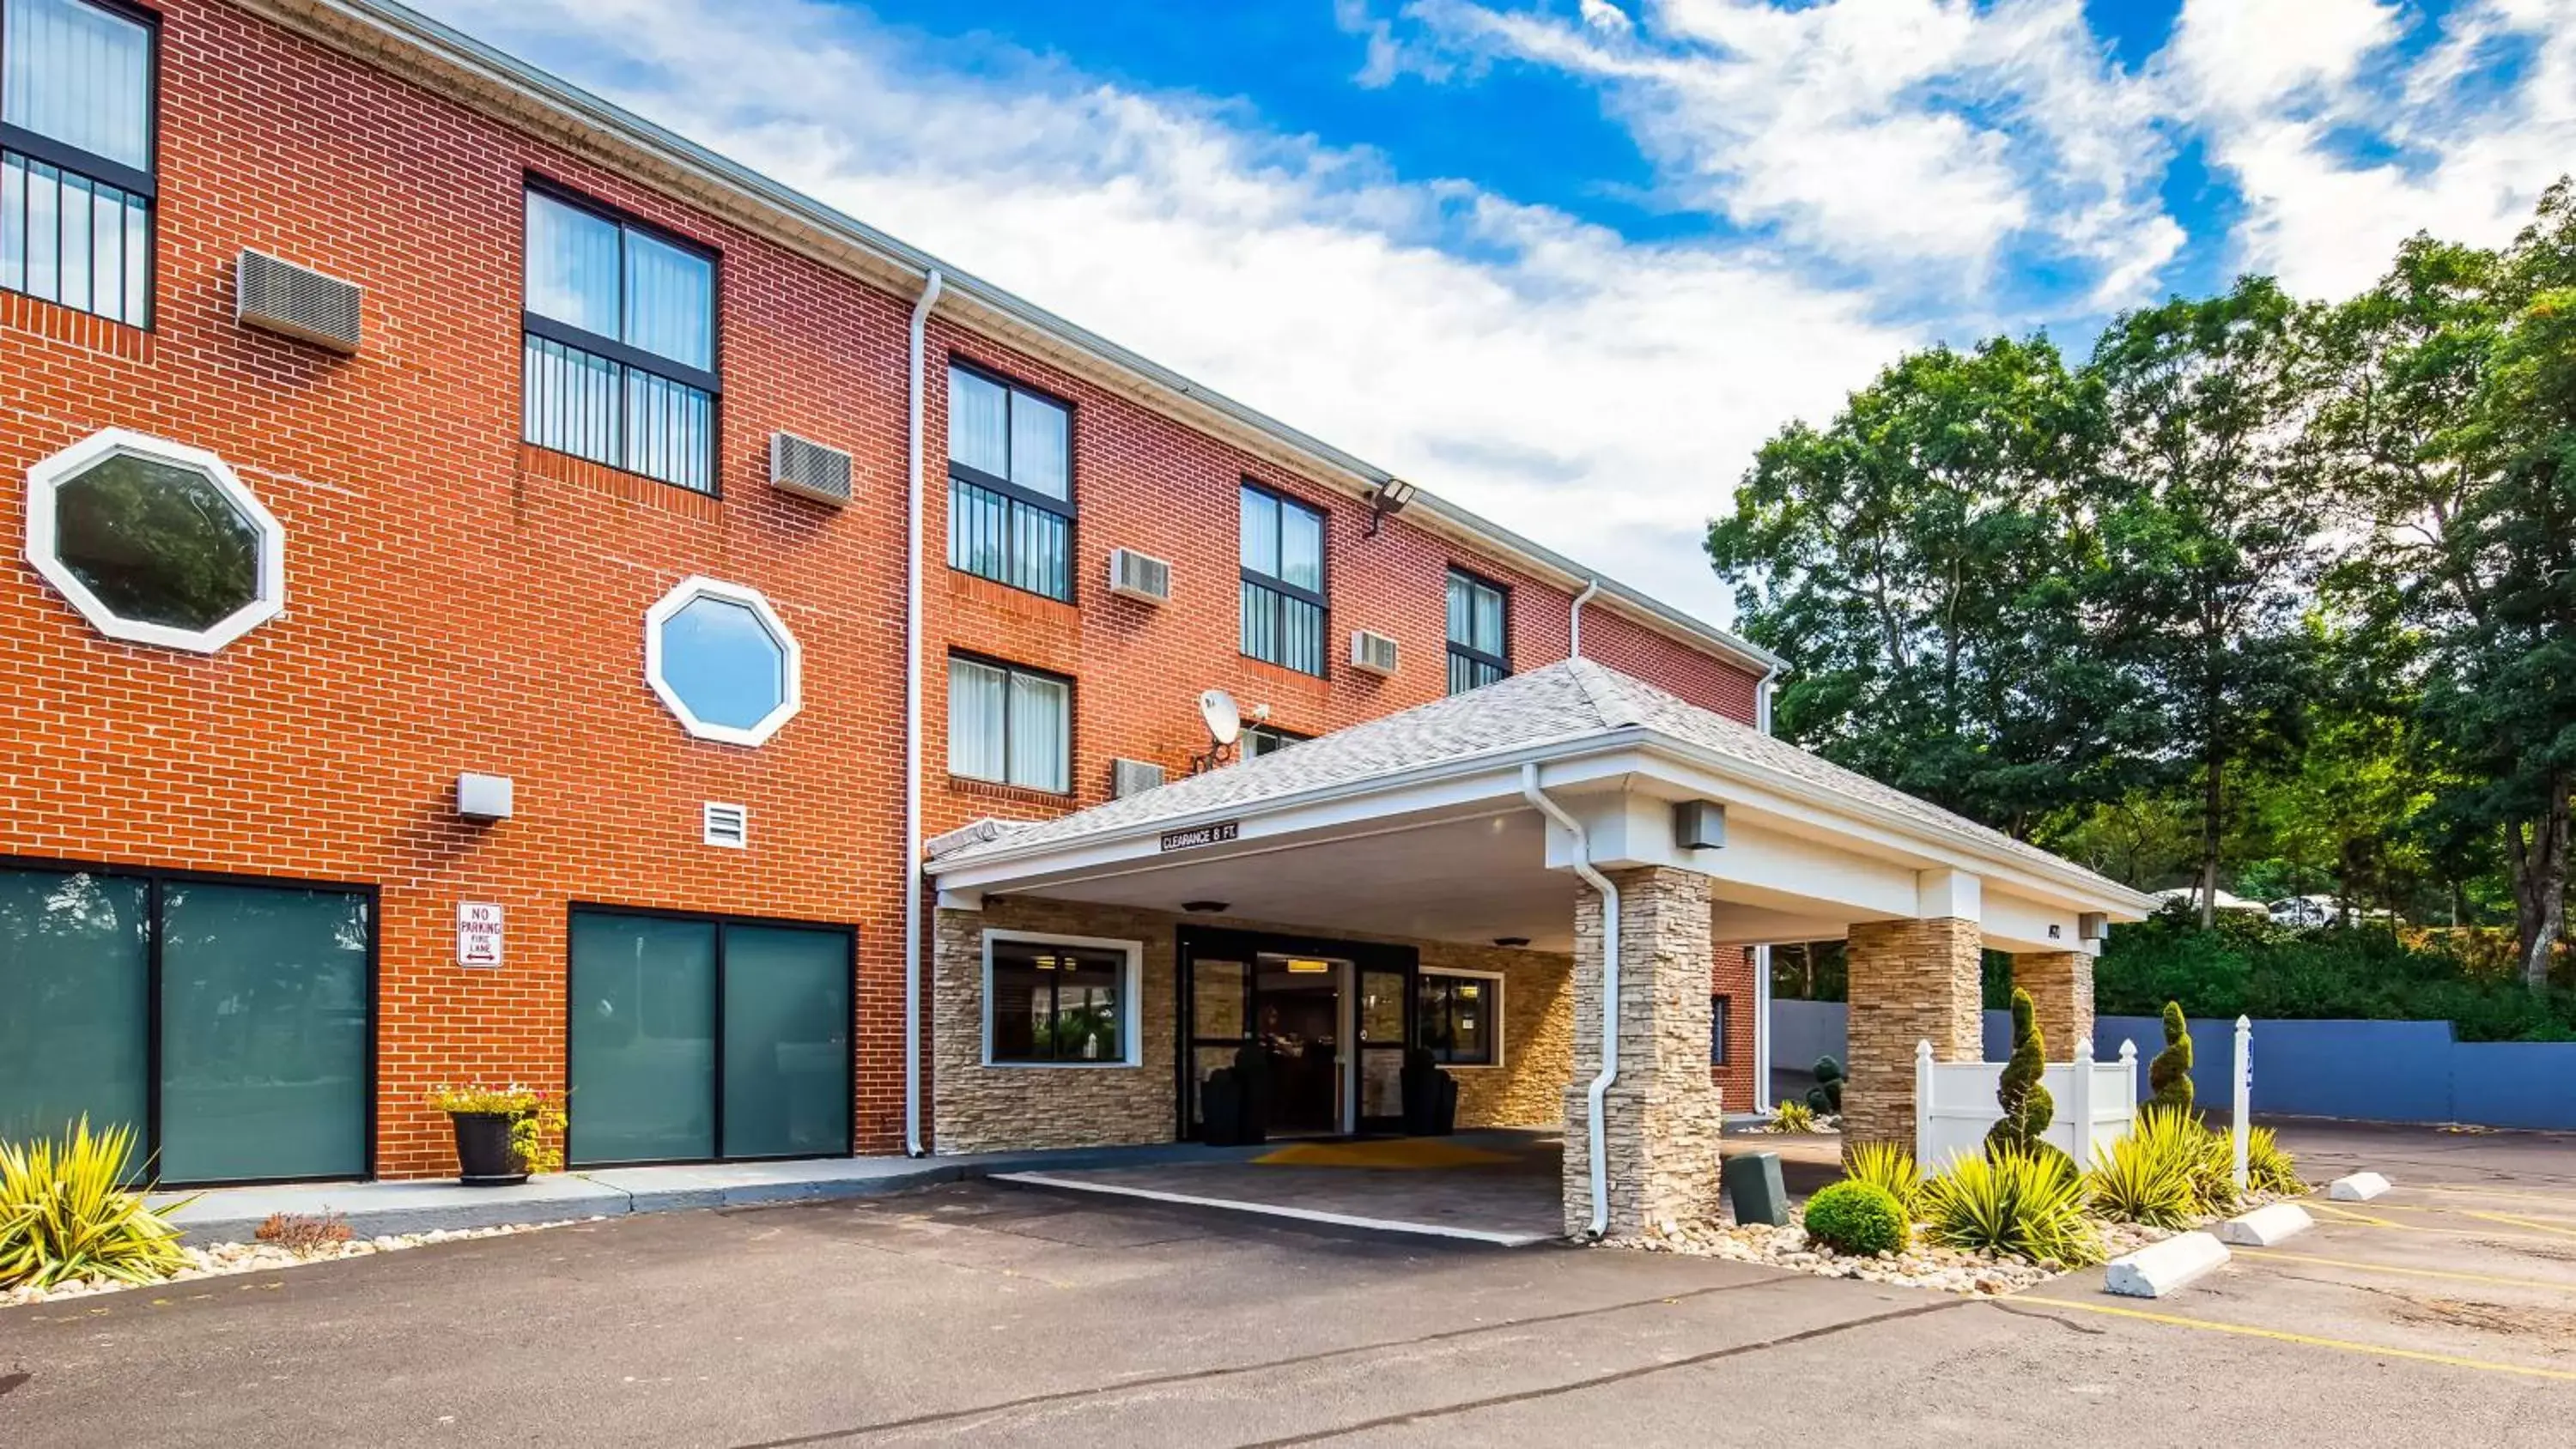 Property Building in Best Western Cape Cod Hotel